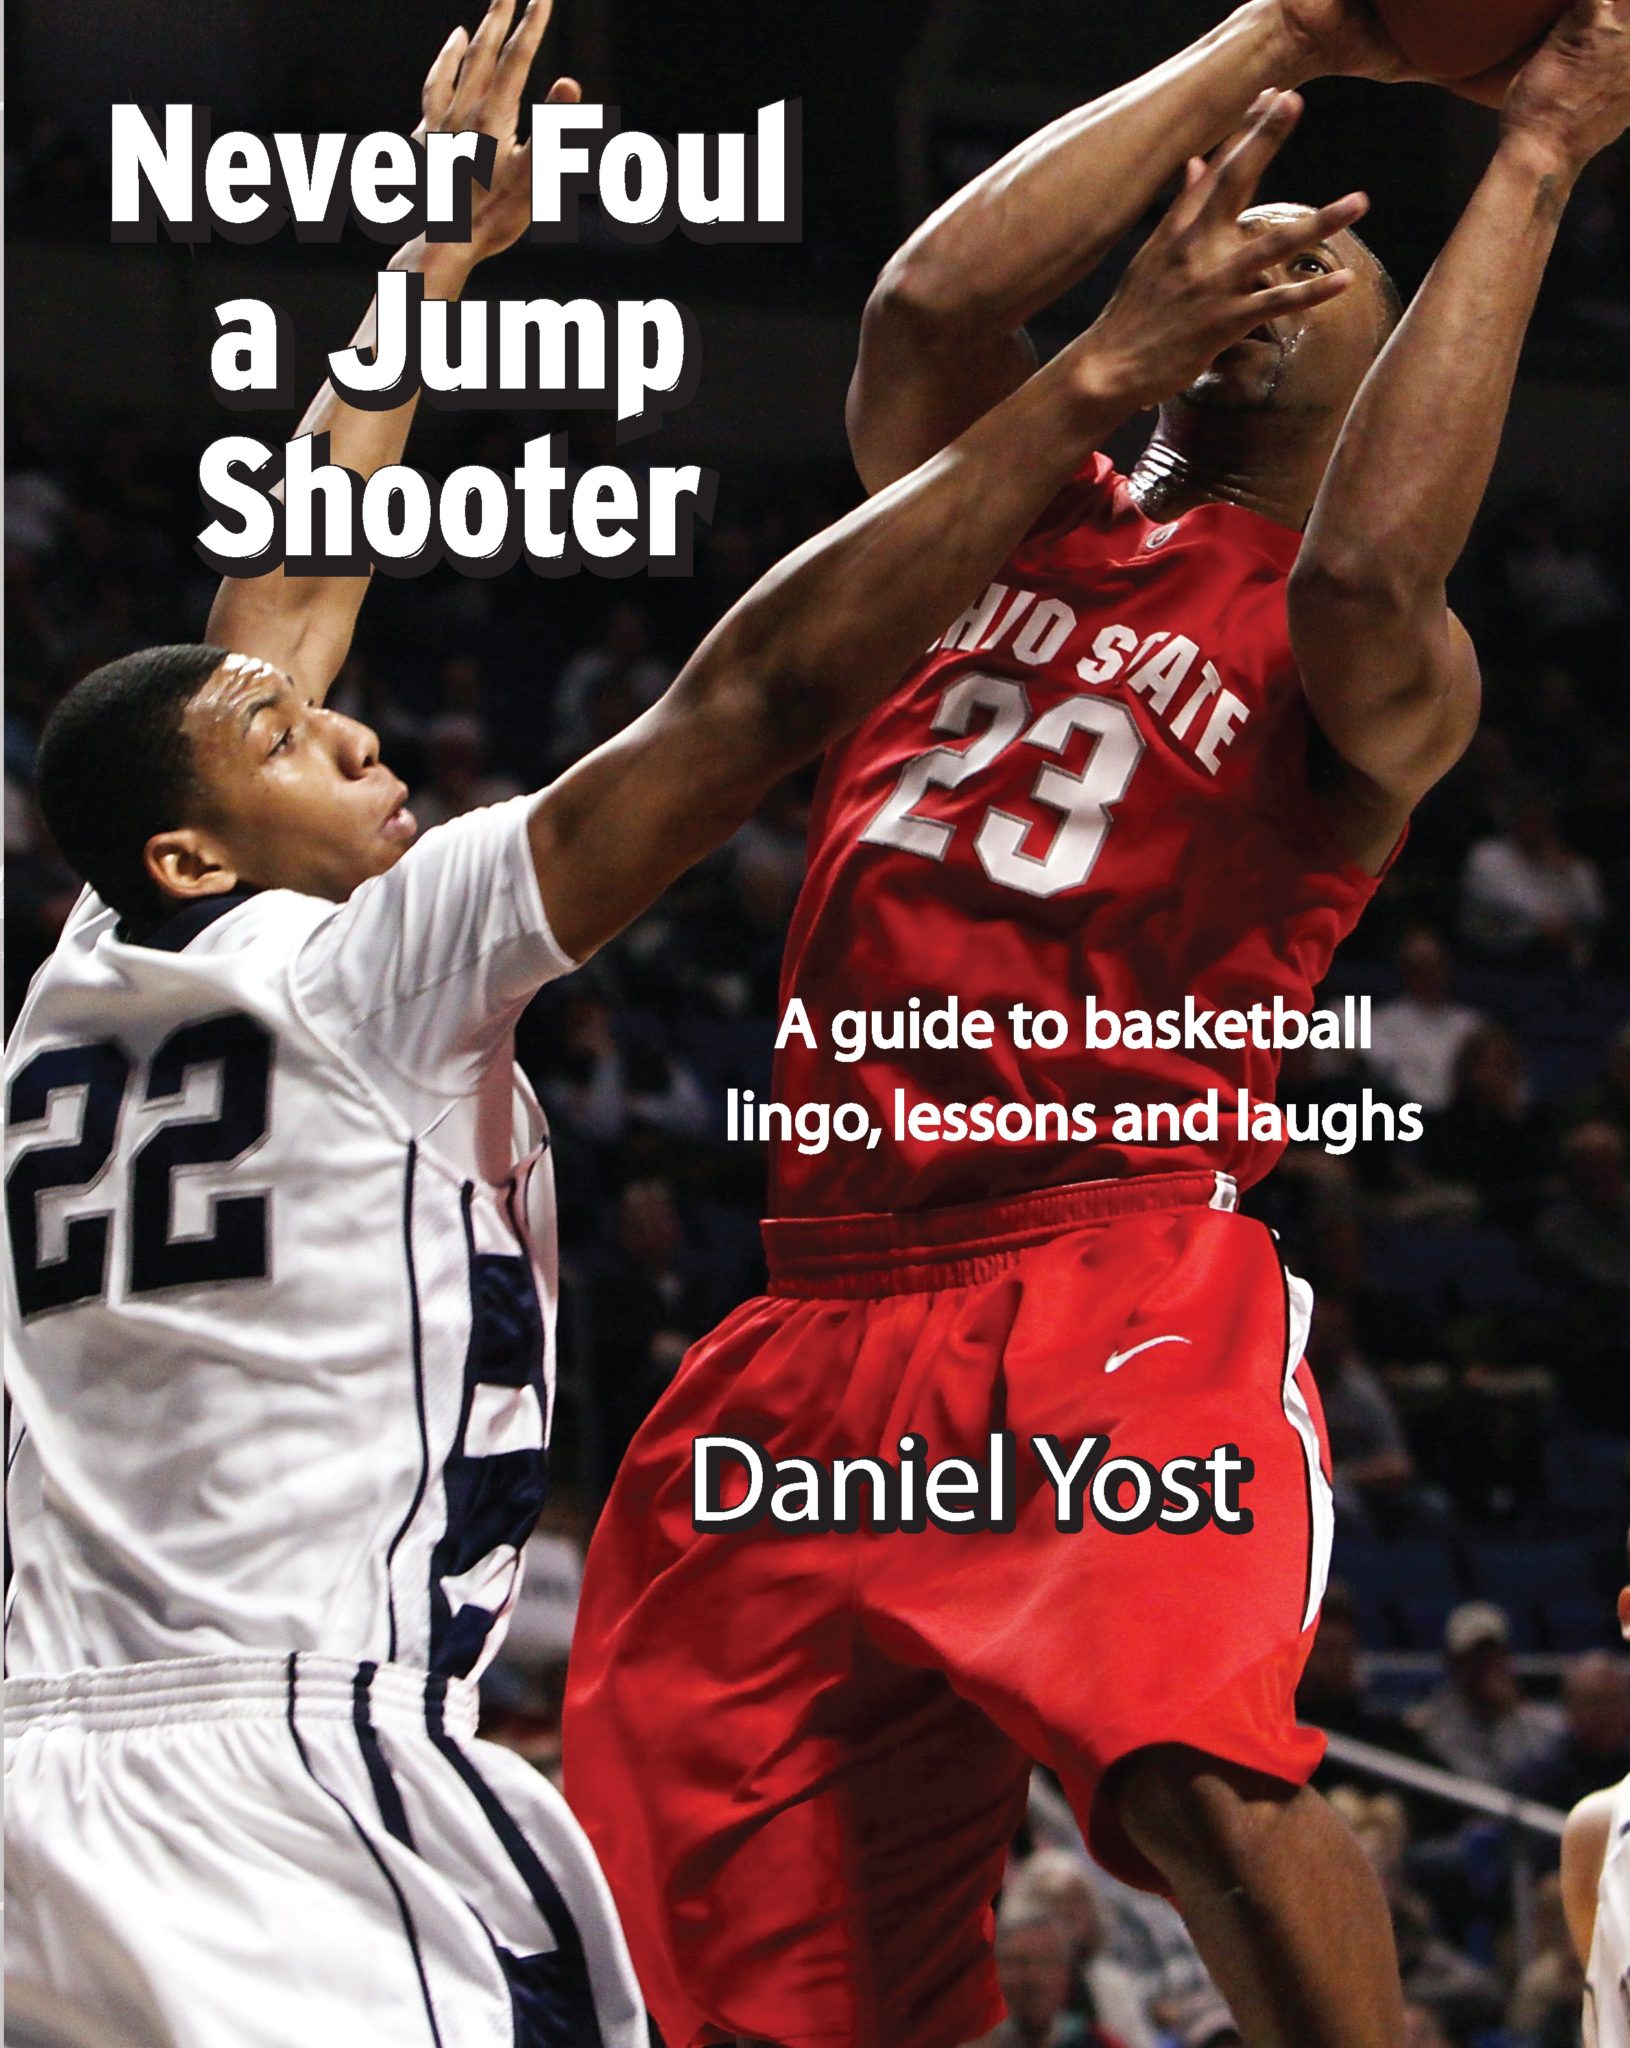 Never Foul A Jump Shooter: A Guide to Basketball Lessons, Lingo and Laughs by Daniel Yost